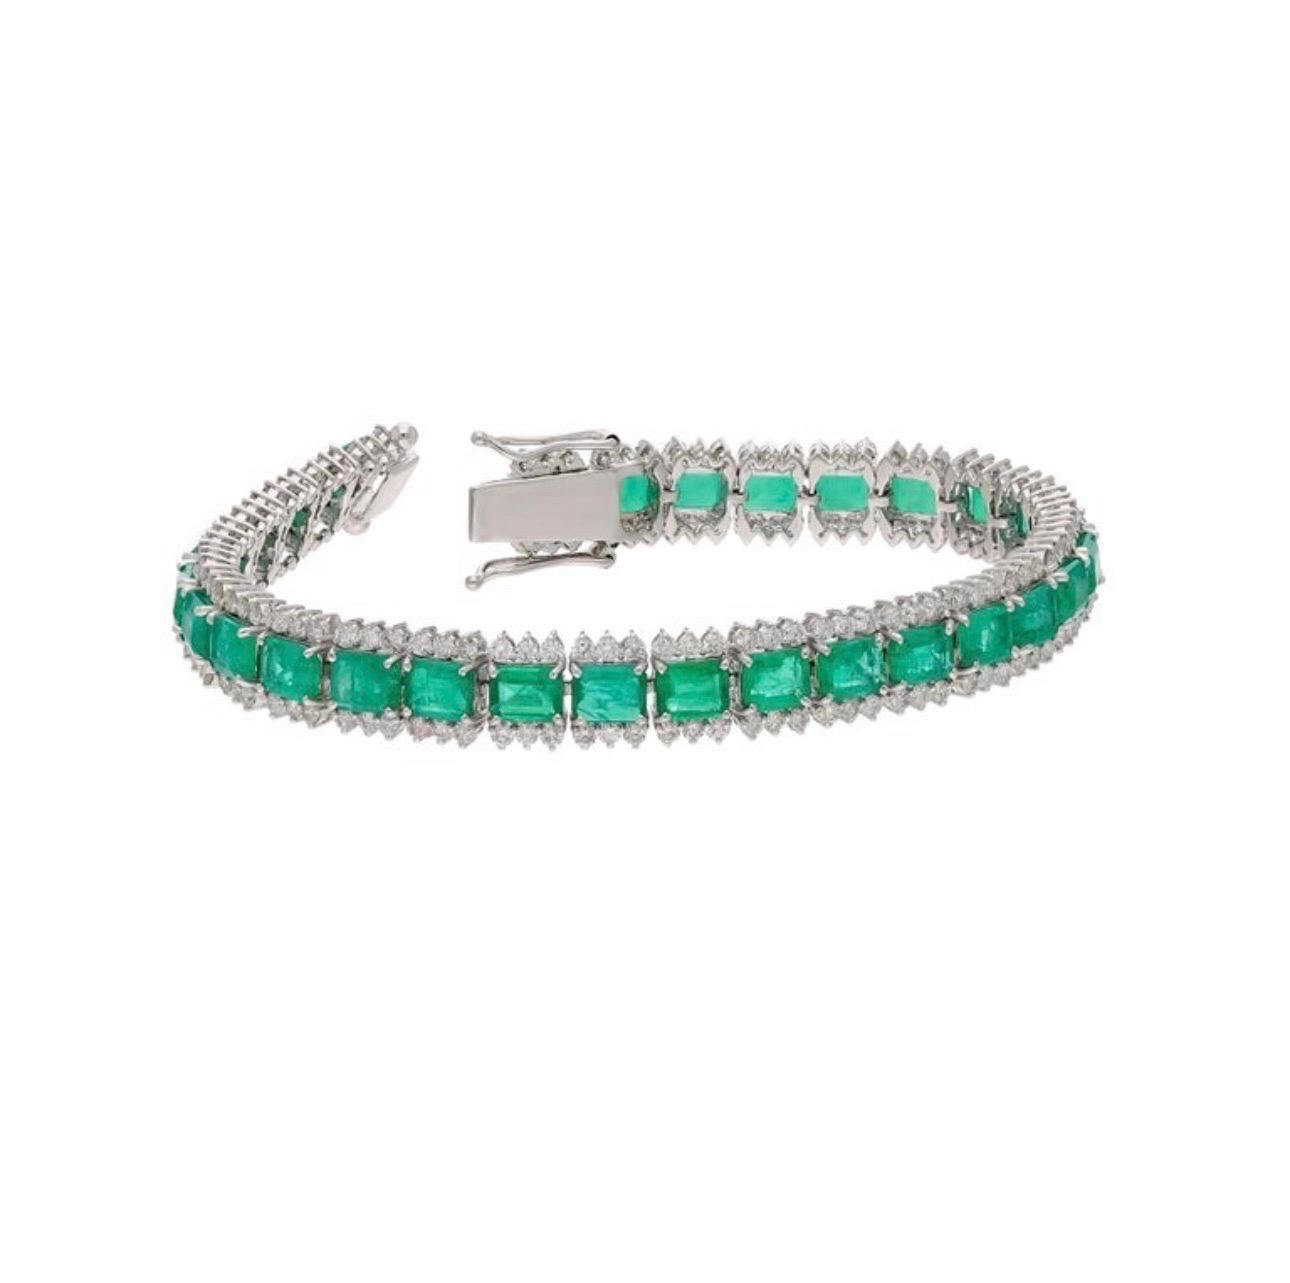 
Introducing a stunning Natural Zambian Emerald Tennis bracelet of exceptional quality. Featuring high-quality emeralds and top-notch diamonds with VS1 clarity and G color. The emerald boasts an impressive 12.46 carats, while the diamonds total 3.25